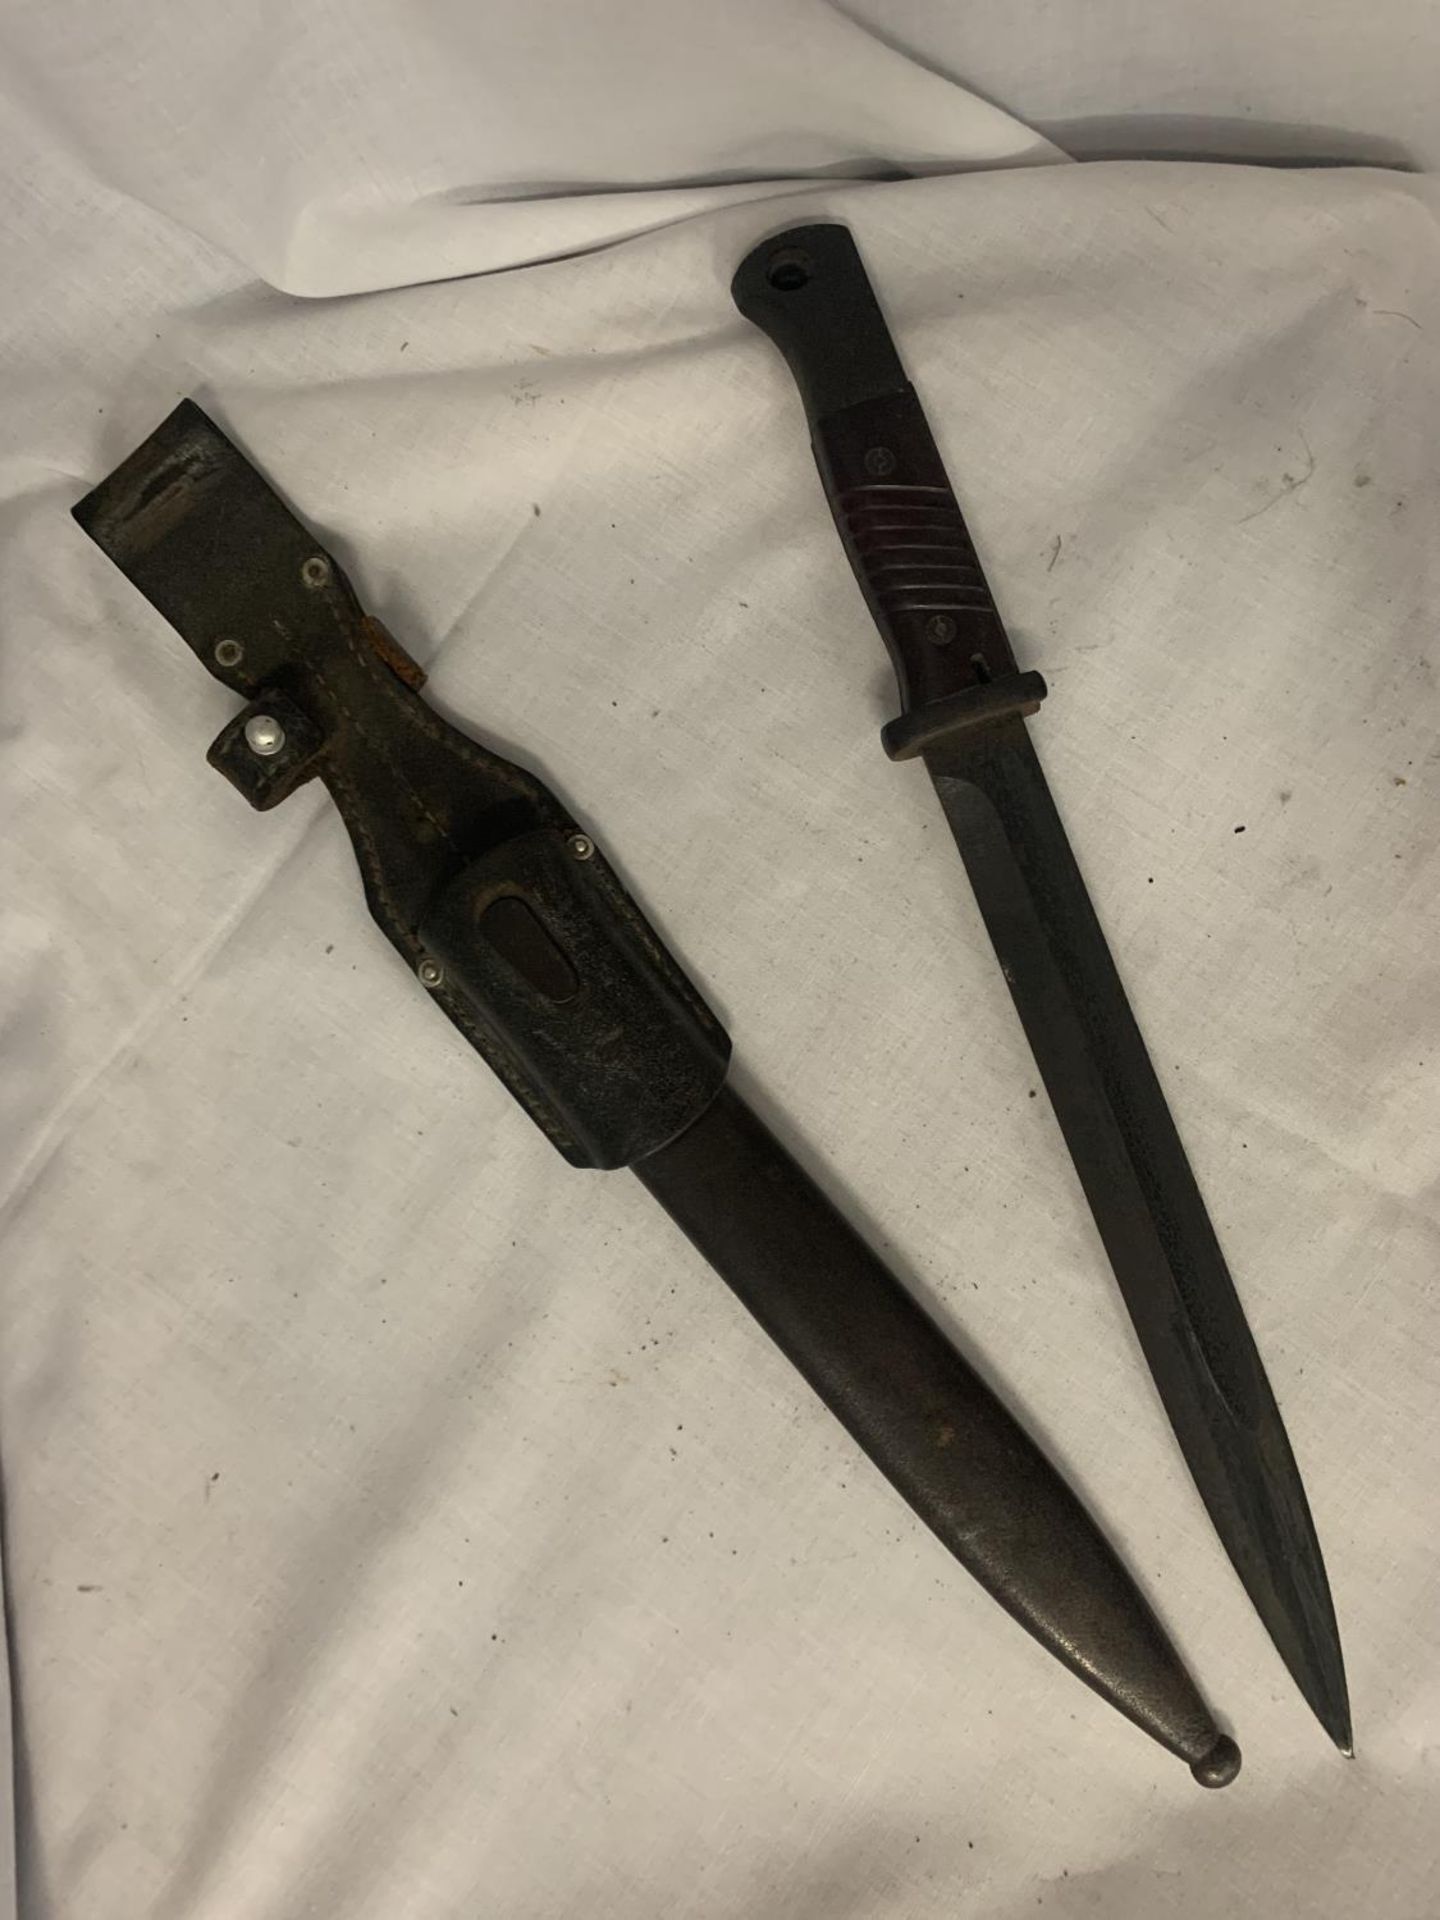 A MILITARY KNIFE AND SHEATH - Image 2 of 3